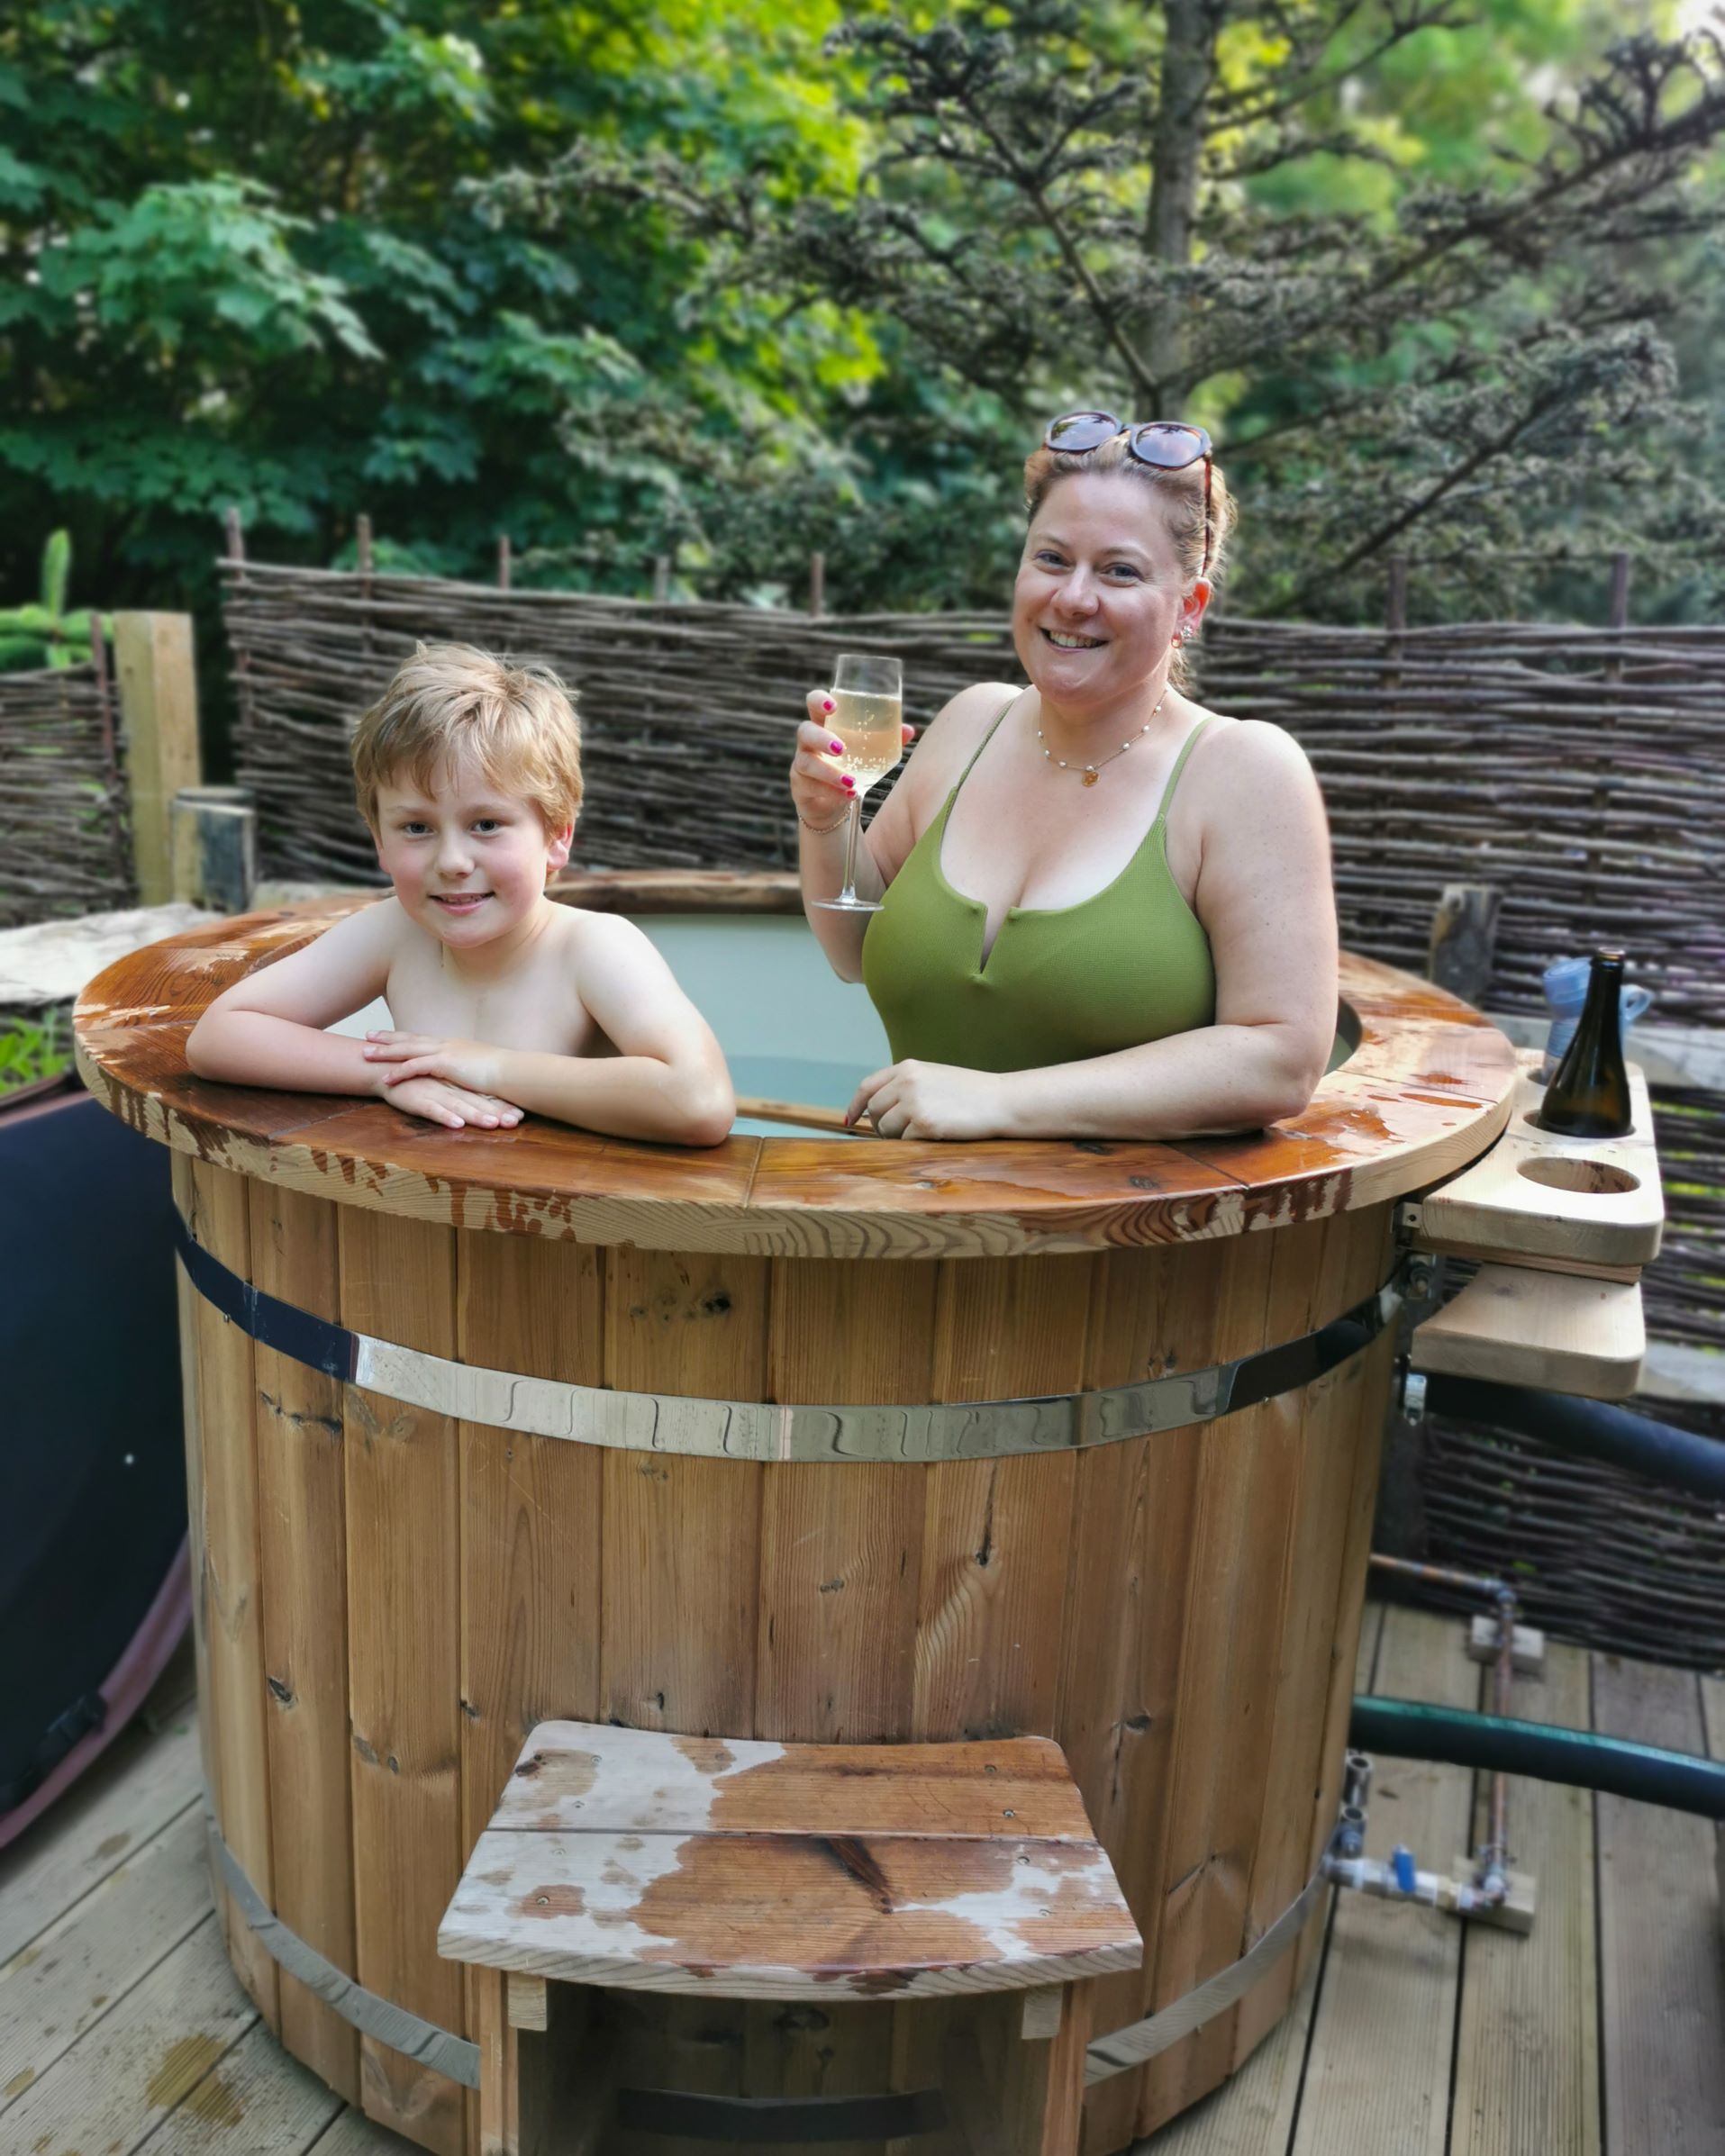  Eco Lodge at Hayne Barn Estate, Eco Lodge, Family-Friendly, Kent Getaway, Visit Kent, Staycation, Family Weekend, Kent Life, the Frenchie Mummy, Review, Lodge, Retreat in Nature, Press Trip